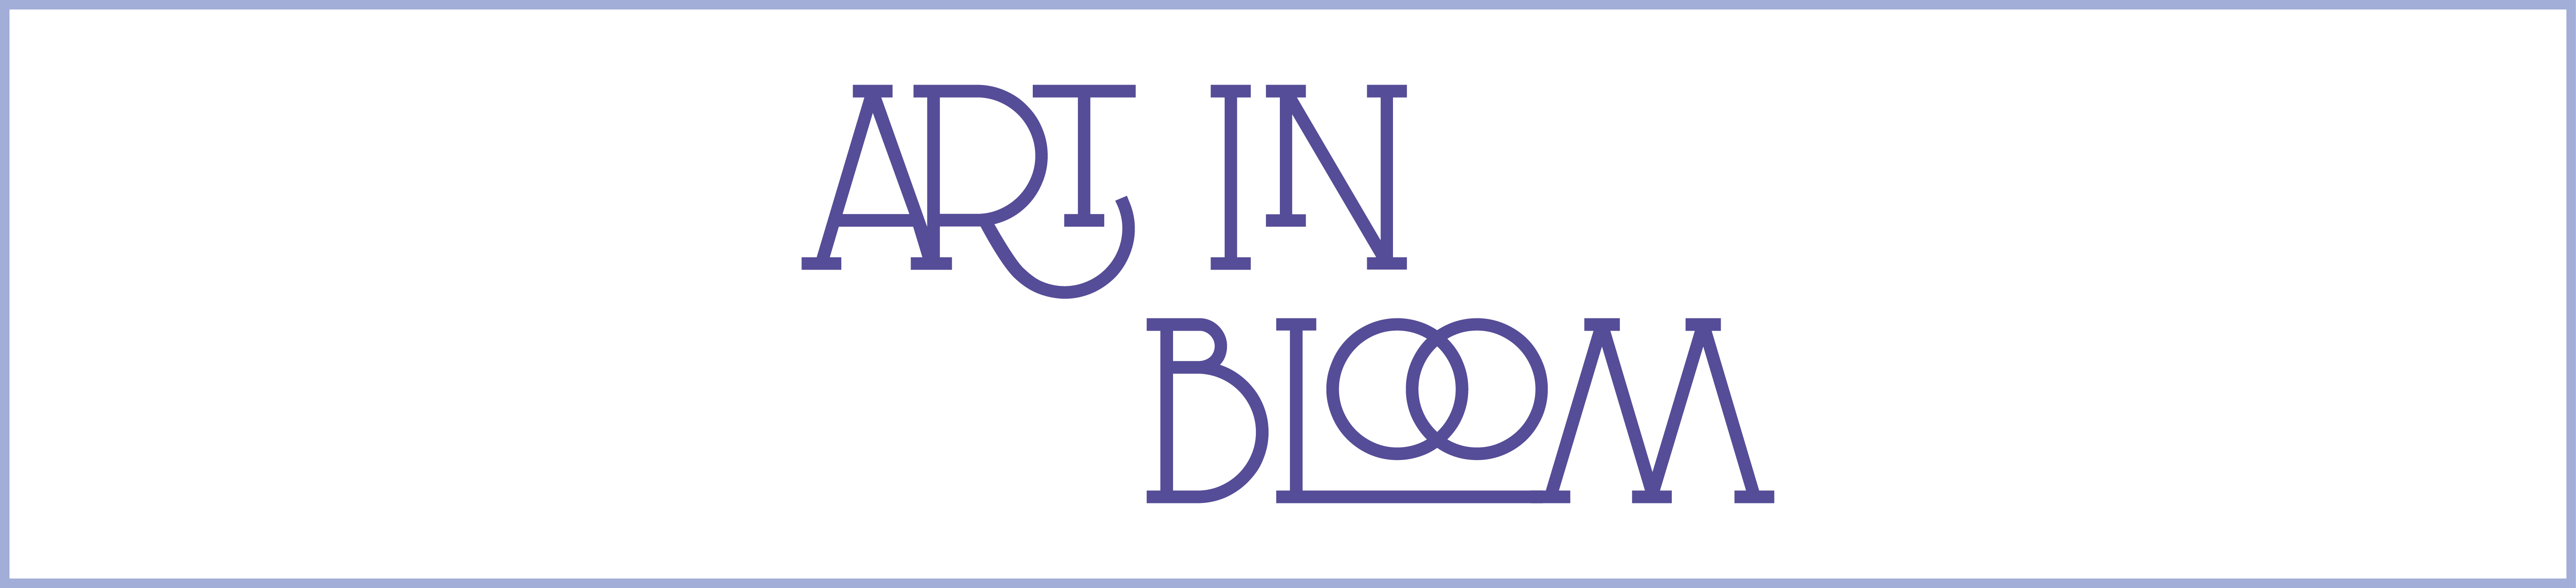 White horizontal banner with "Art in Bloom" written in purple font.